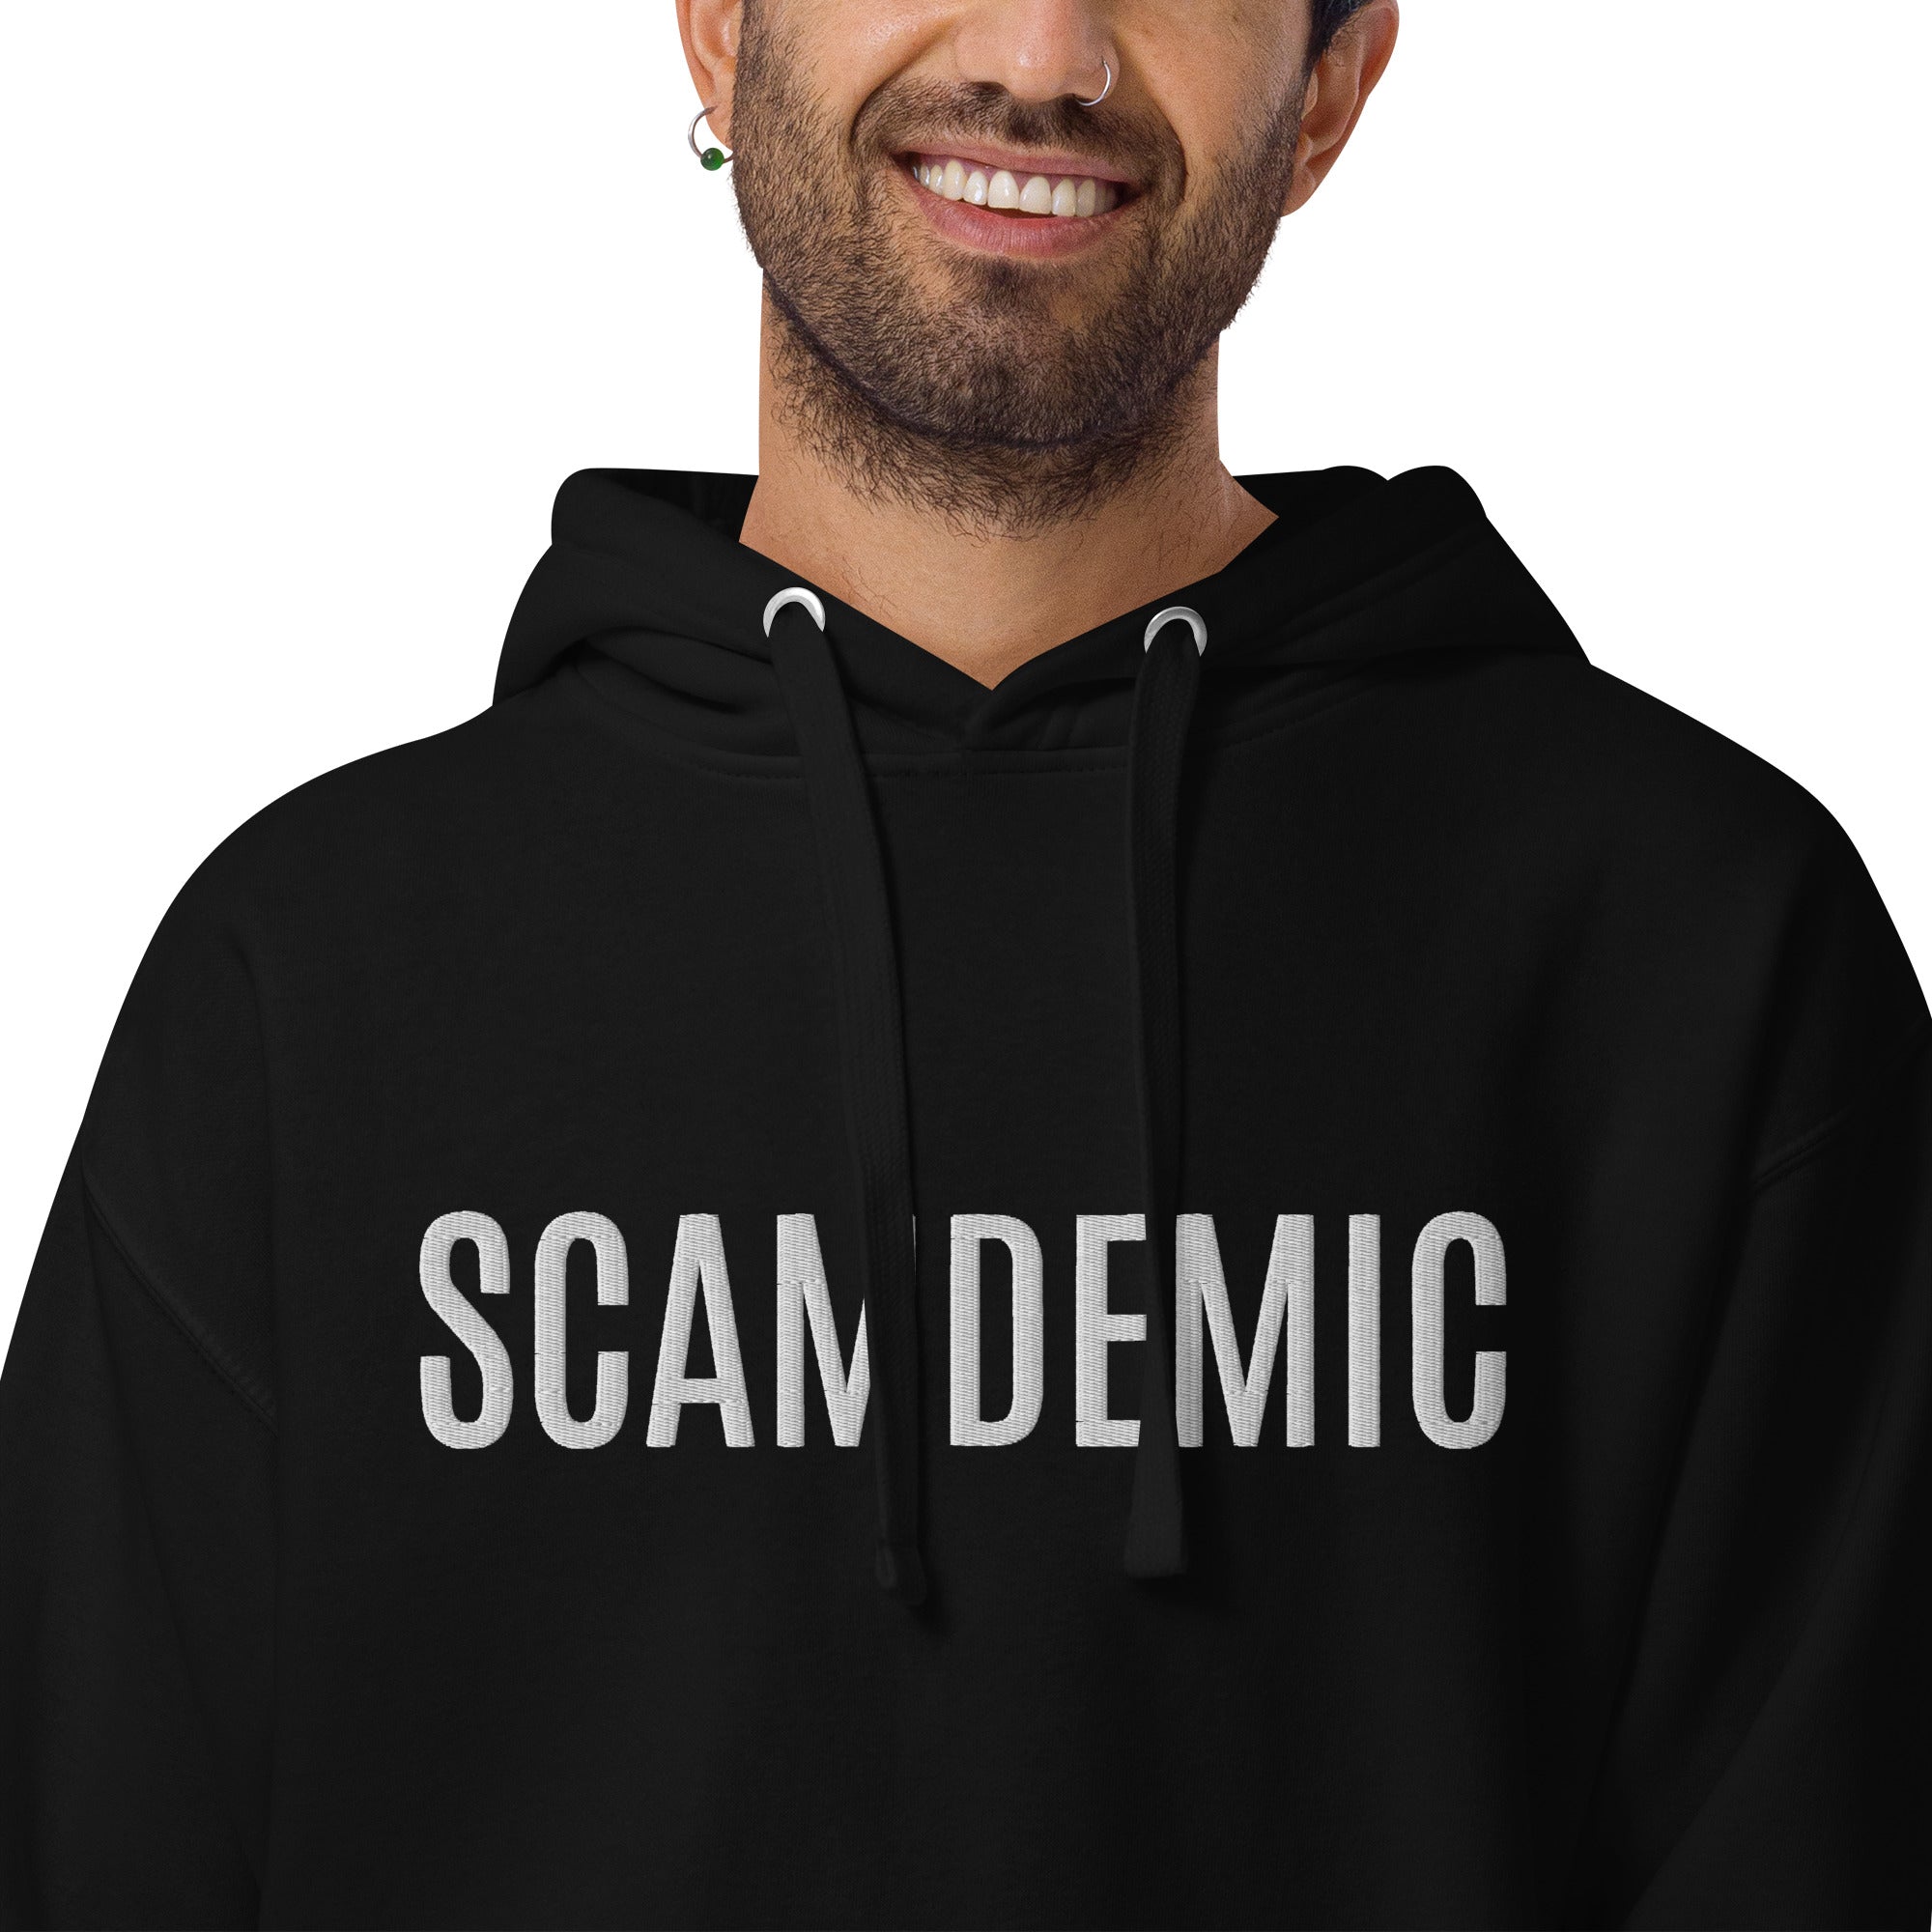 Scamdemic Embroidered Unisex Hoodie